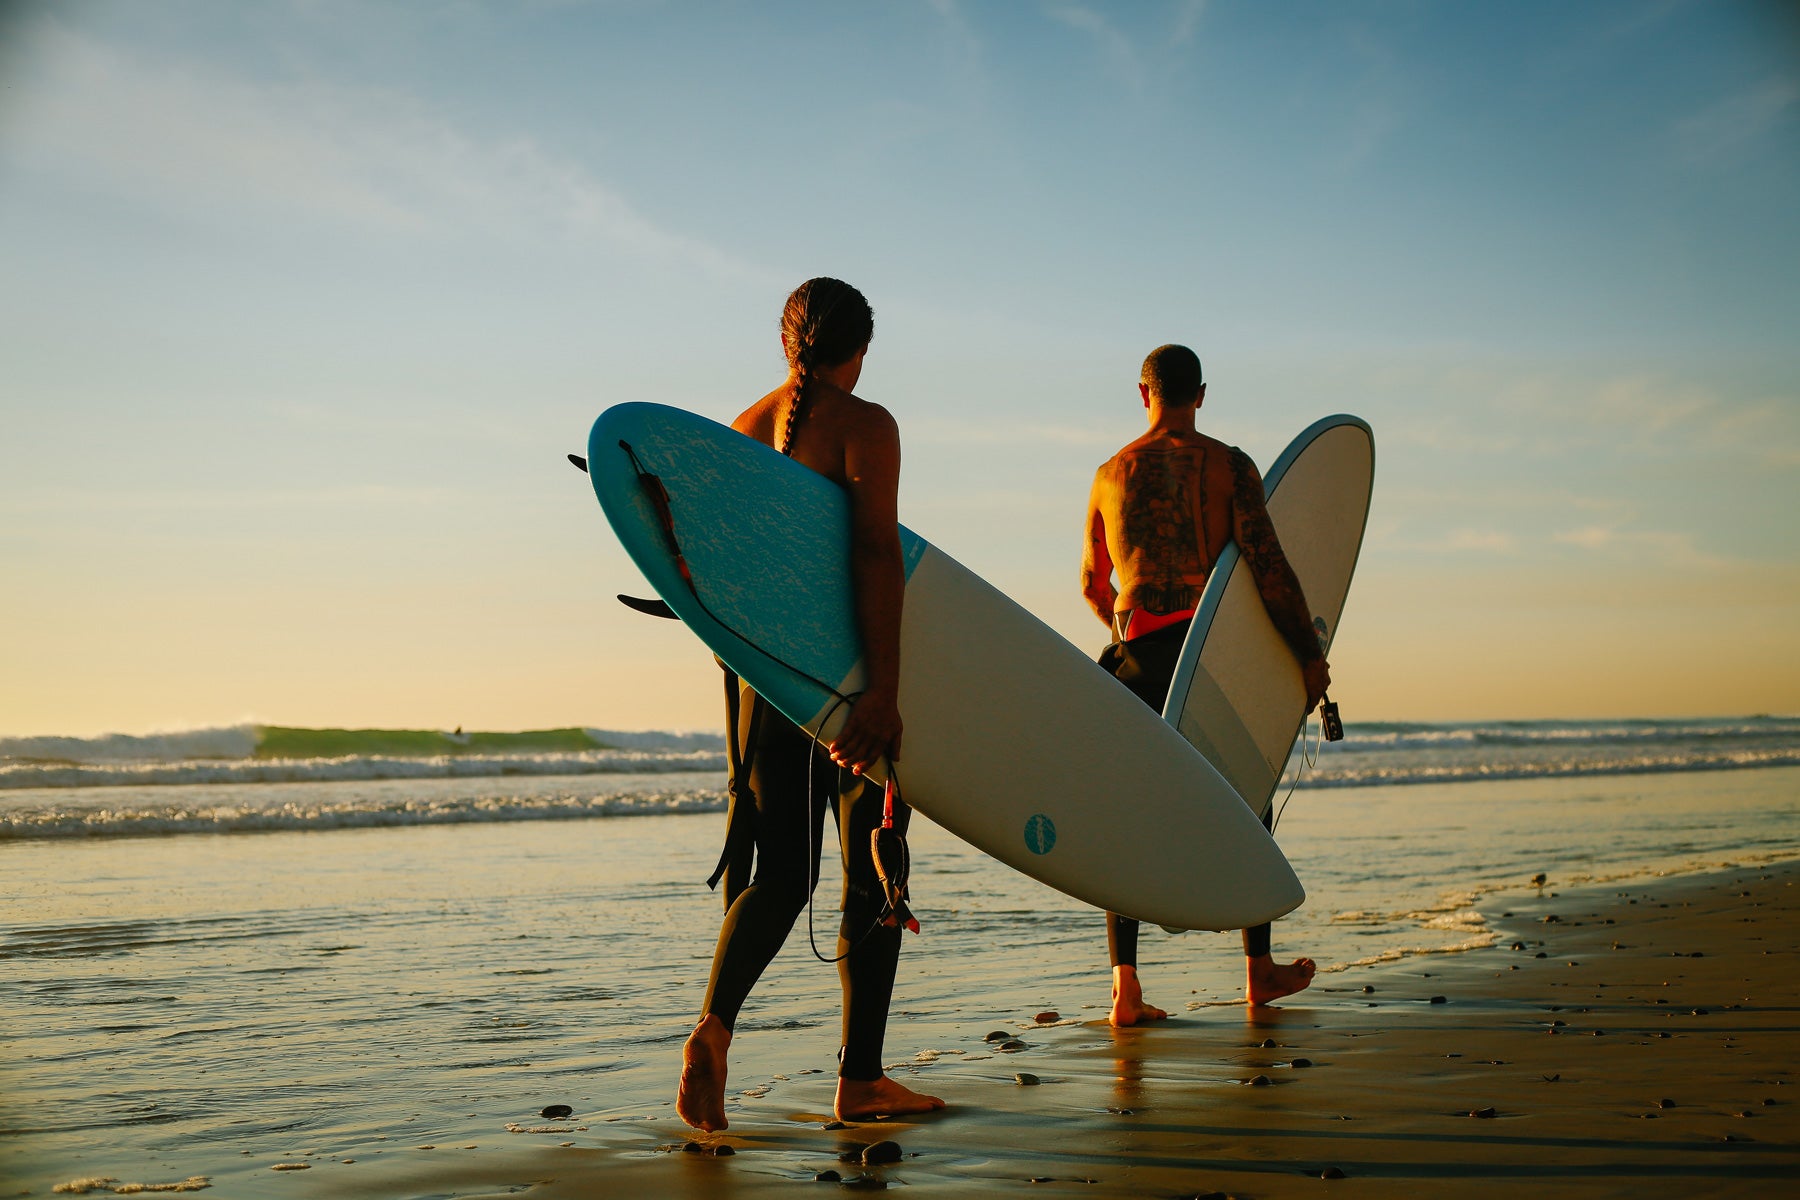 2 Surfers walking on beach carrying surfboards and checking out the waves. 